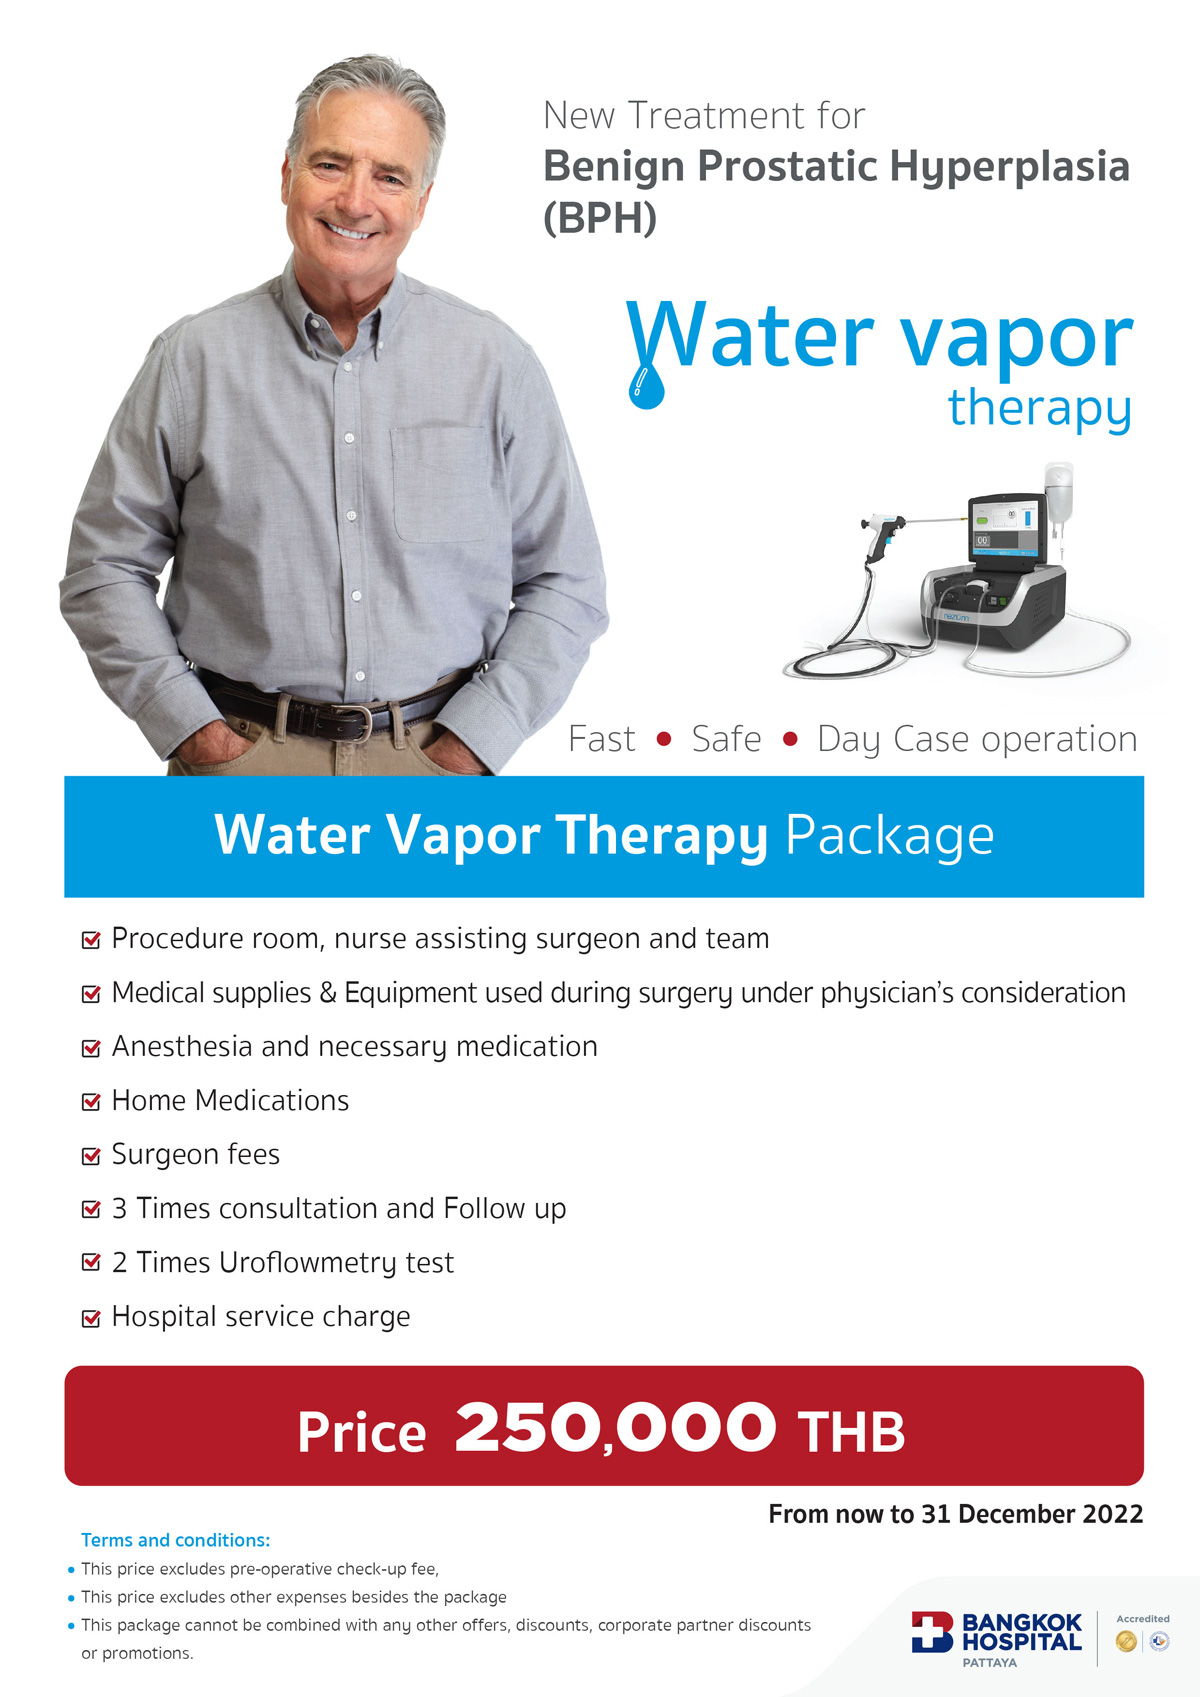 WaterVaporTherapy